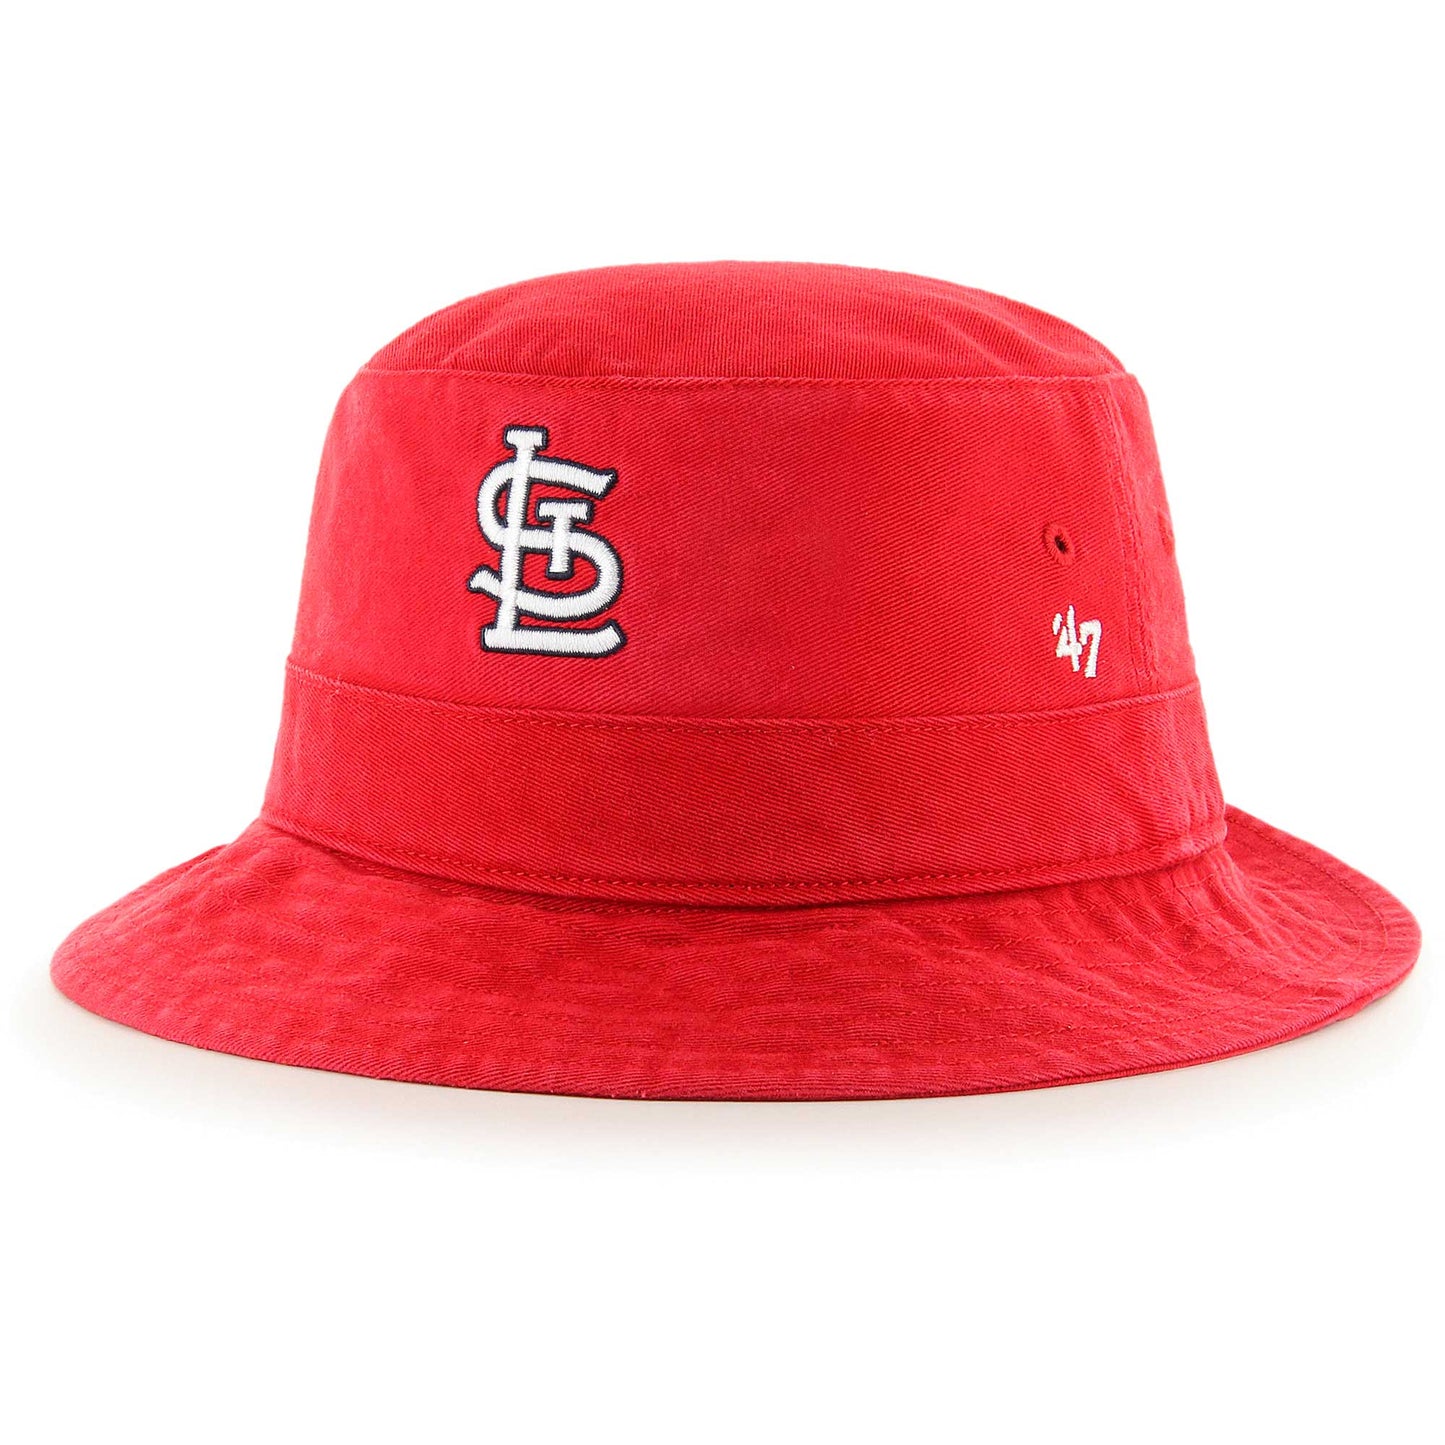 St. Louis Cardinals '47 Primary Bucket Hat - Red